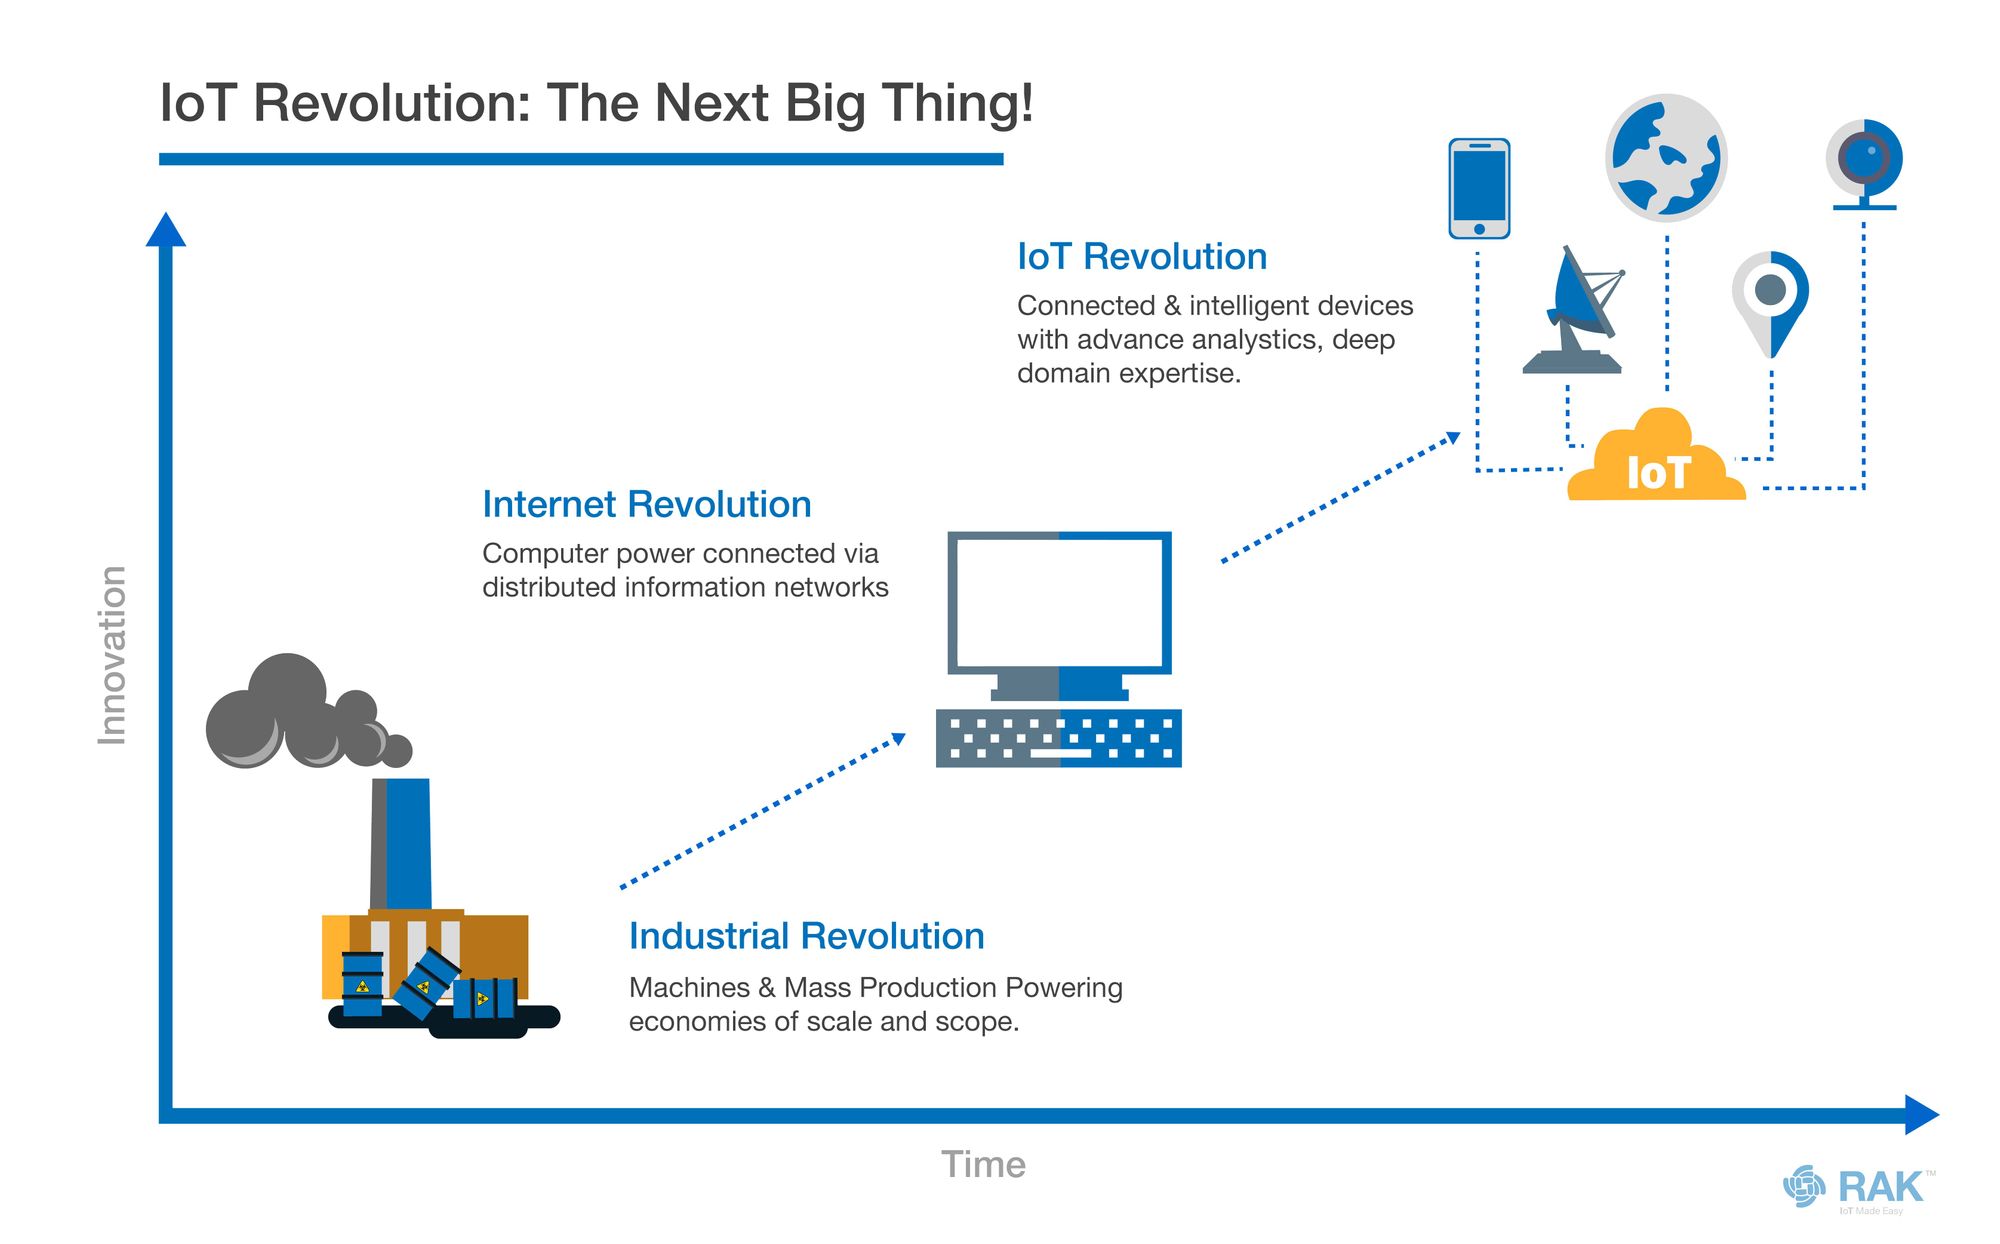 Why IoT is New Big Thing